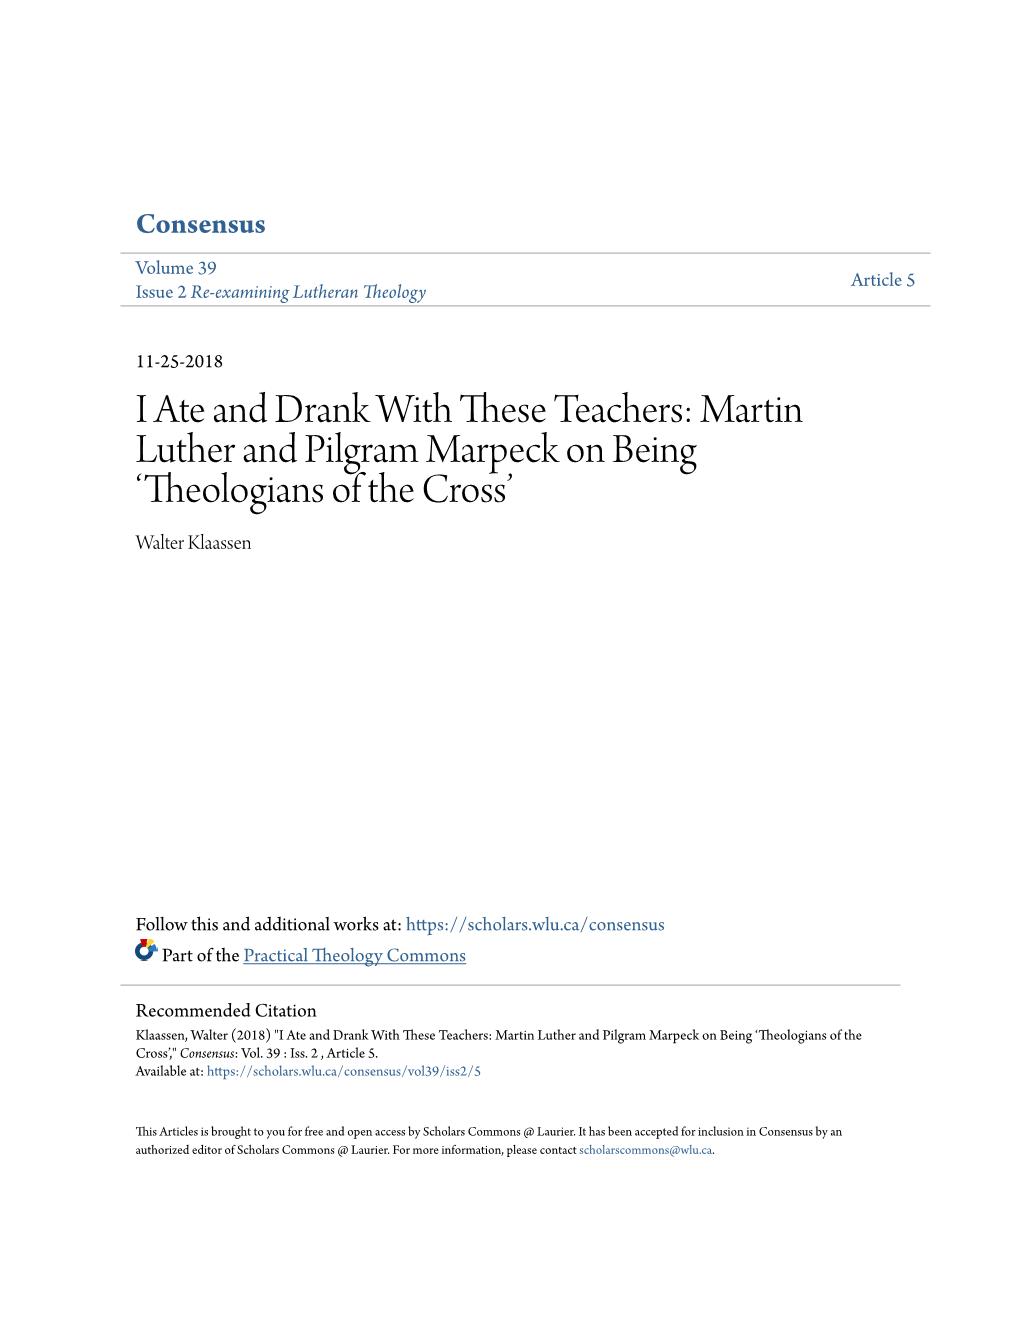 I Ate and Drank with These Teachers: Martin Luther and Pilgram Marpeck on Being Â•Ÿtheologians of the Crossâ•Ž